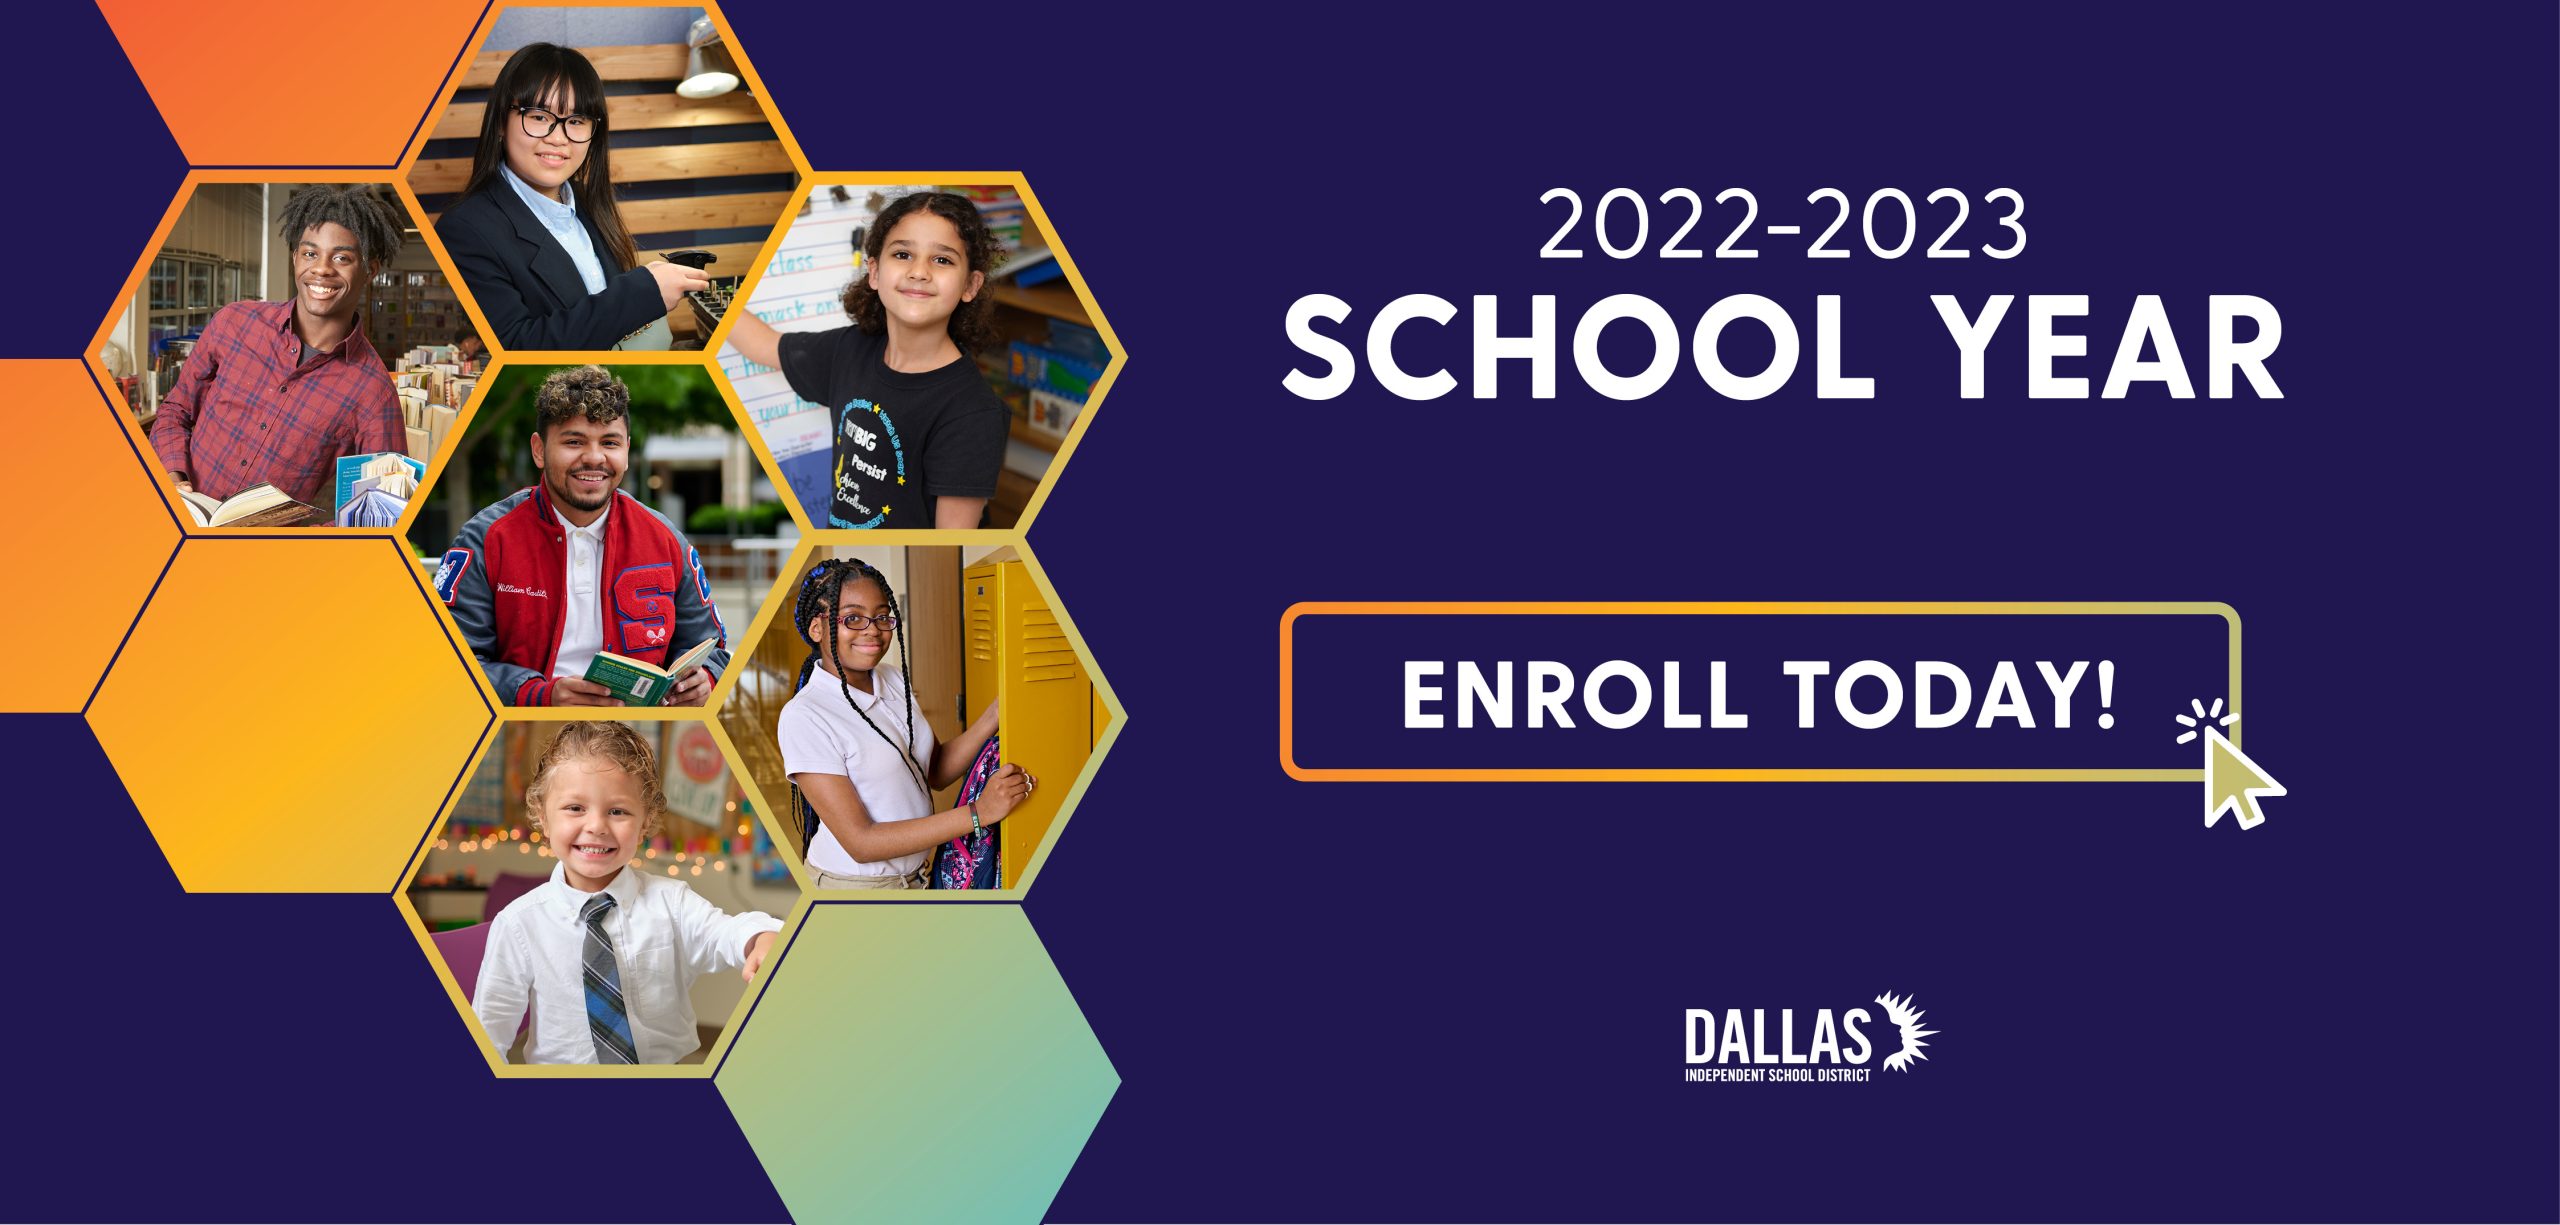 enrollment-now-open-for-the-2022-2023-school-year-the-hub